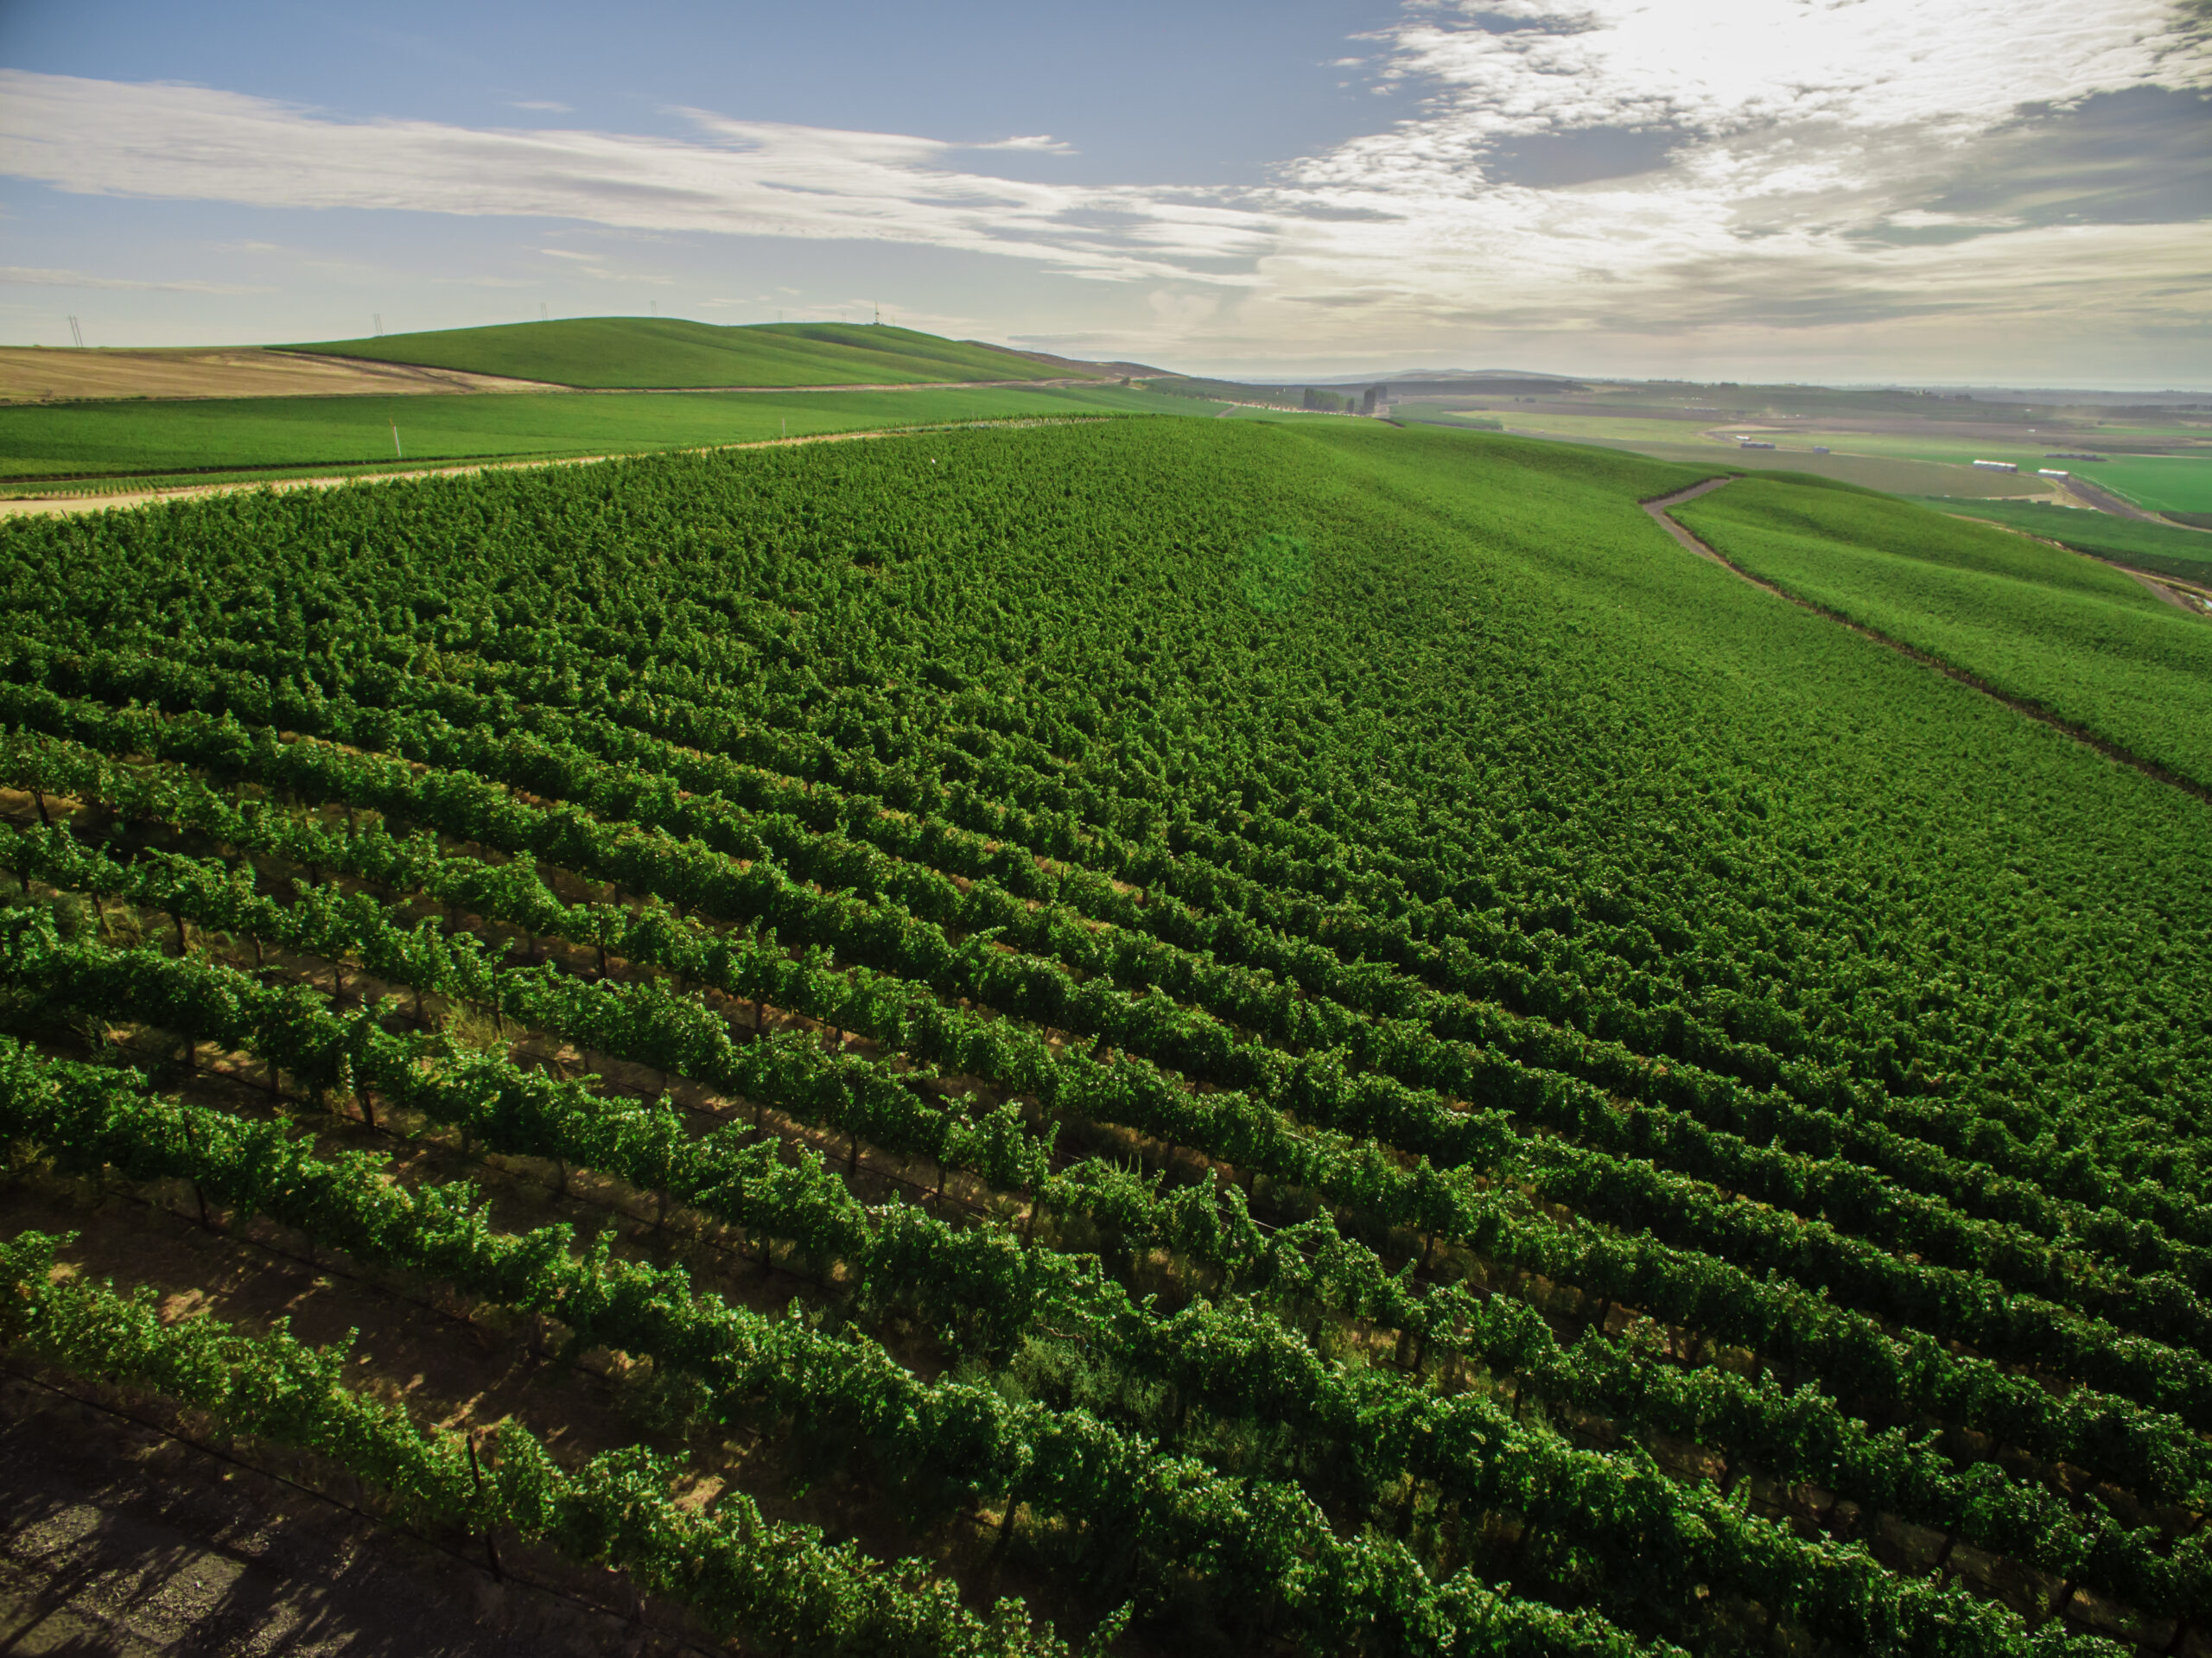 Aerial view of bright green vines in rows stretching toward the horizon under a blue sky with bright white clouds.